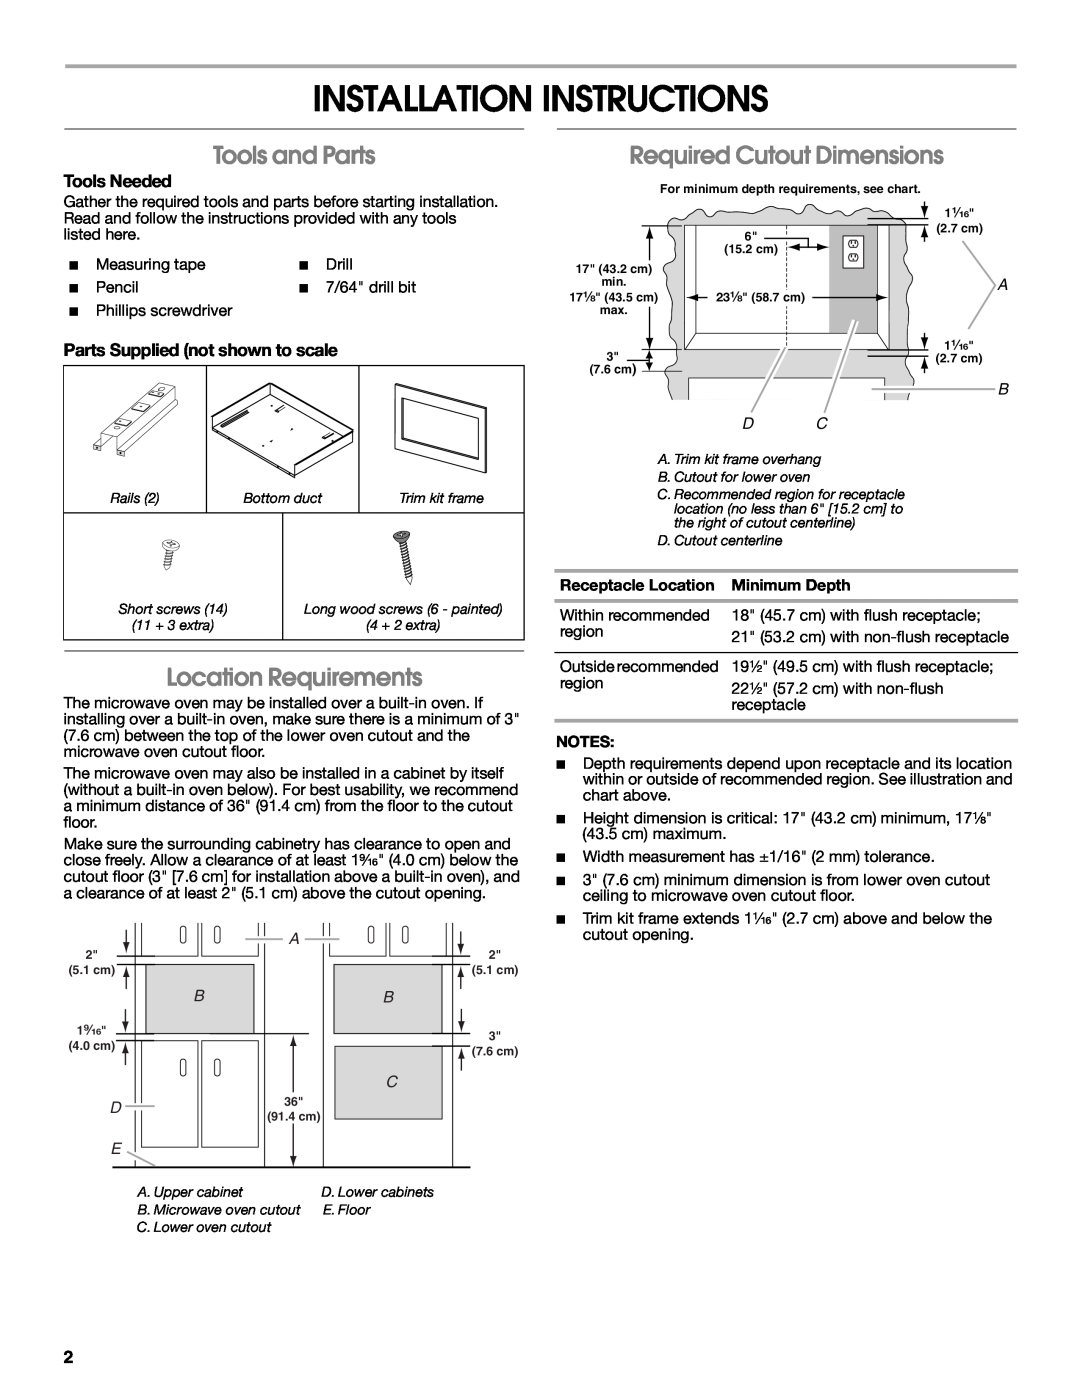 Whirlpool MK2167 Installation Instructions, Tools and Parts, Required Cutout Dimensions, Location Requirements 